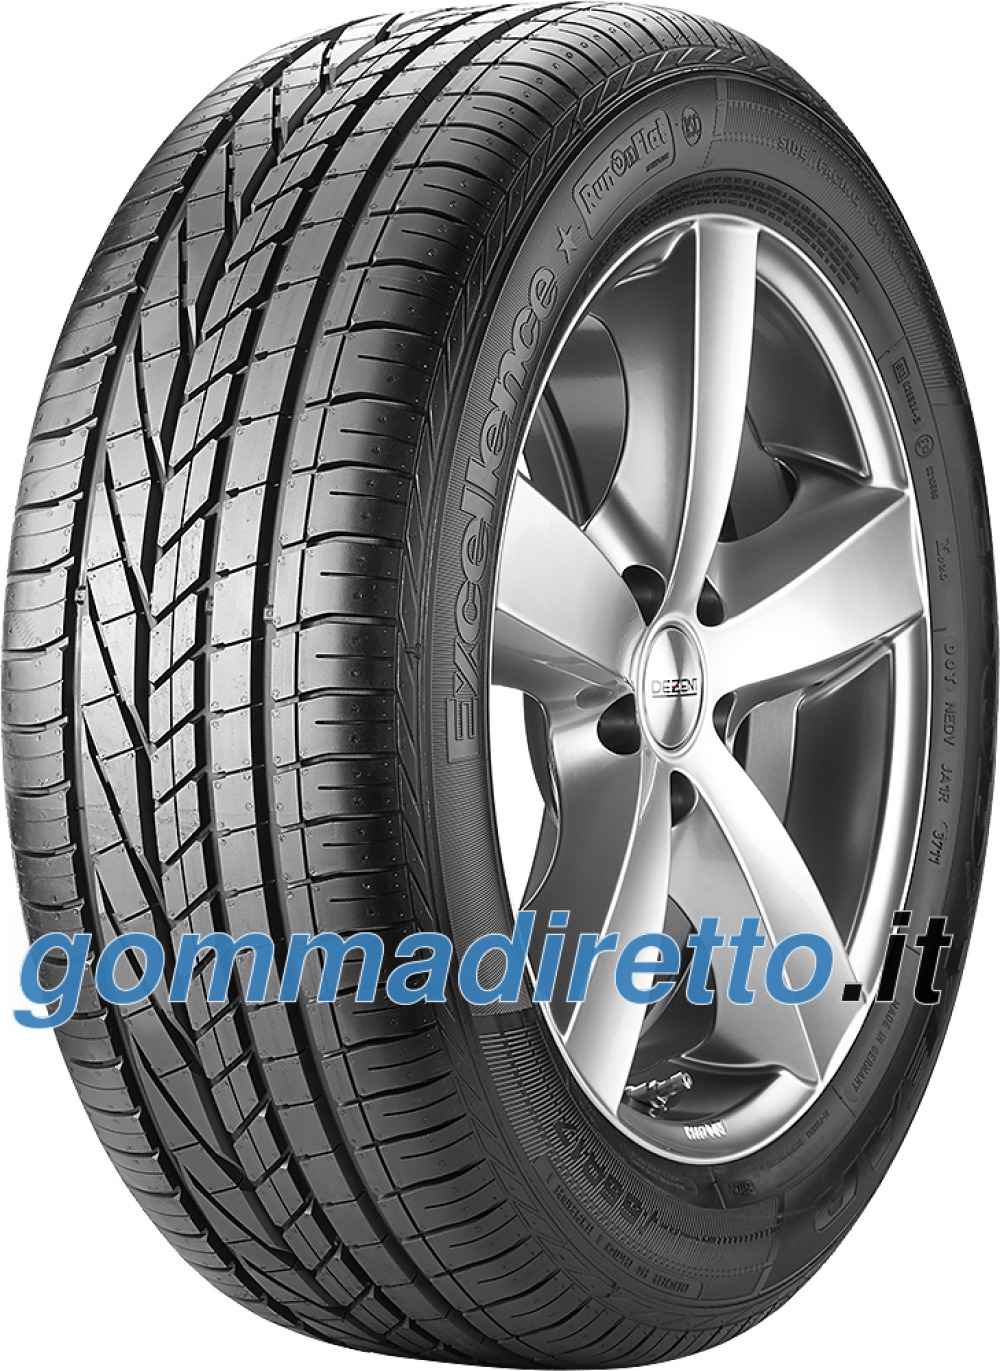 Image of Goodyear Excellence ROF ( 225/50 R17 98W XL runflat )